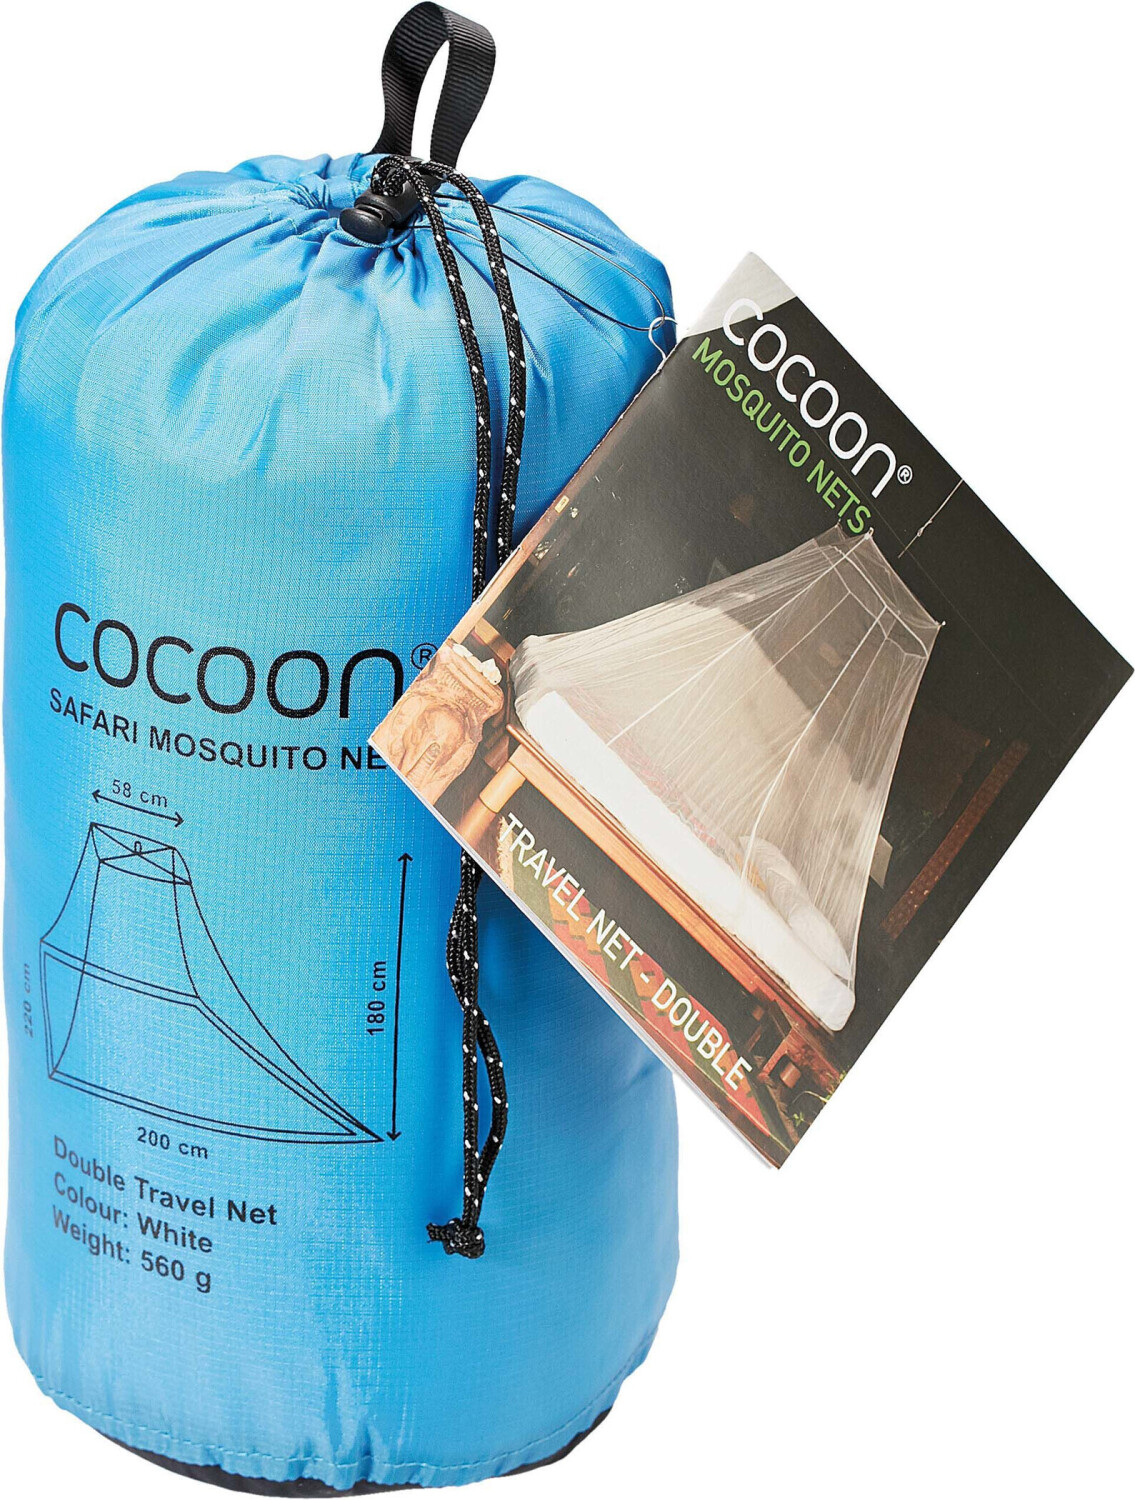 Cocoon Mosquito Travel Net Ultralight Double white ab 38,99 €